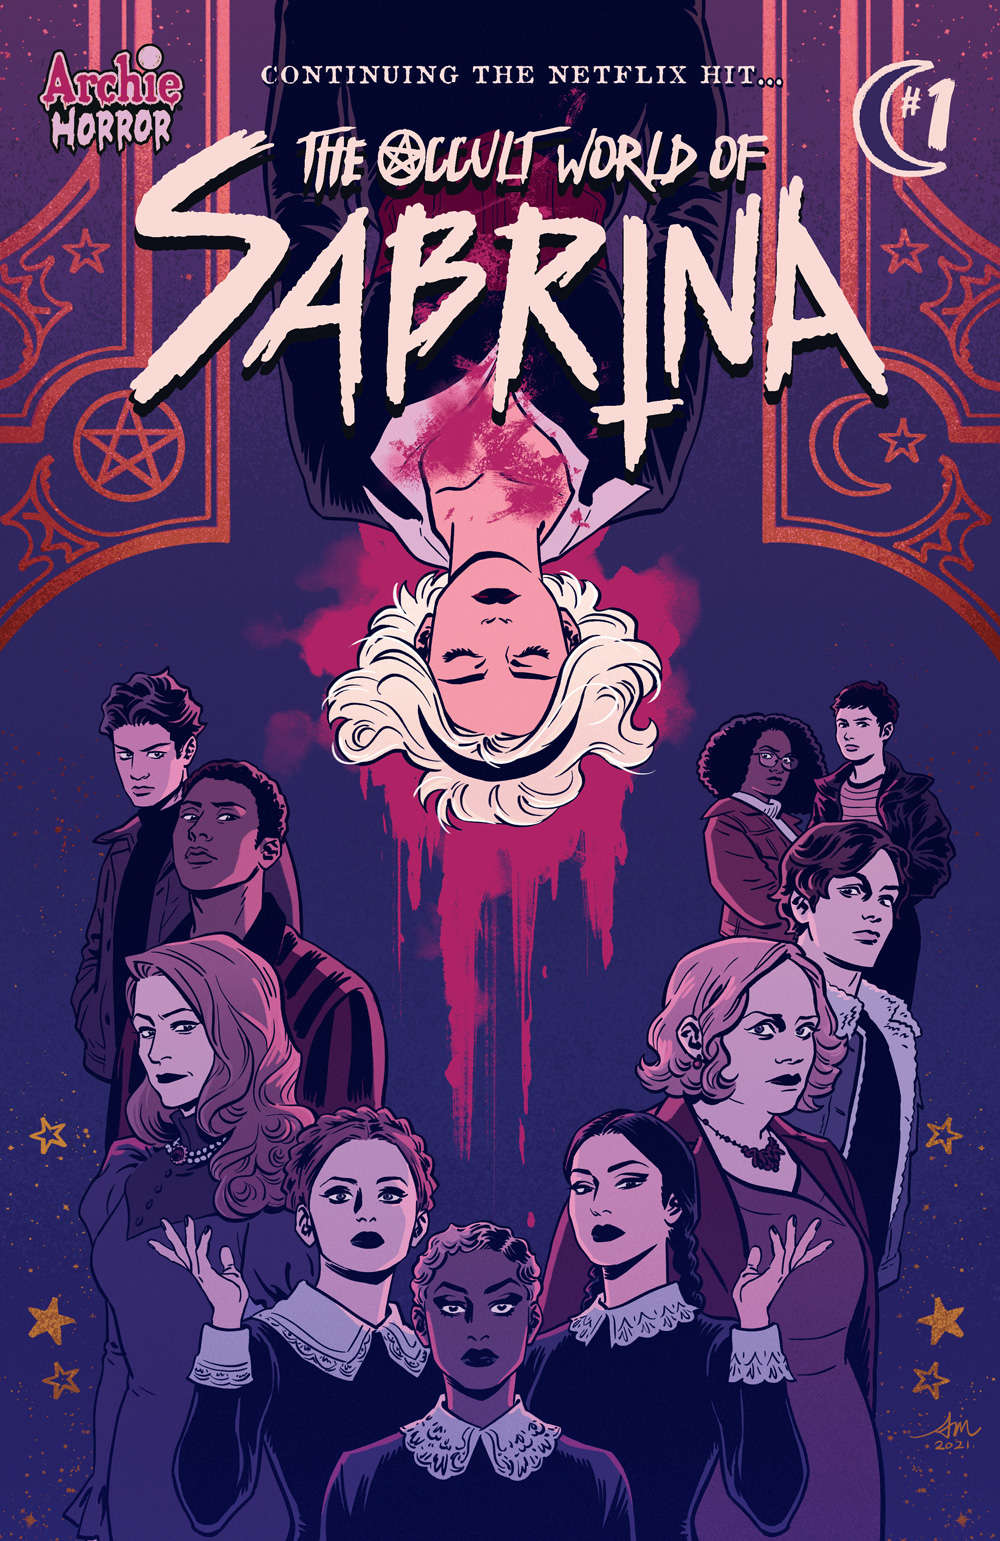 Chilling adventures of sabrina comic book